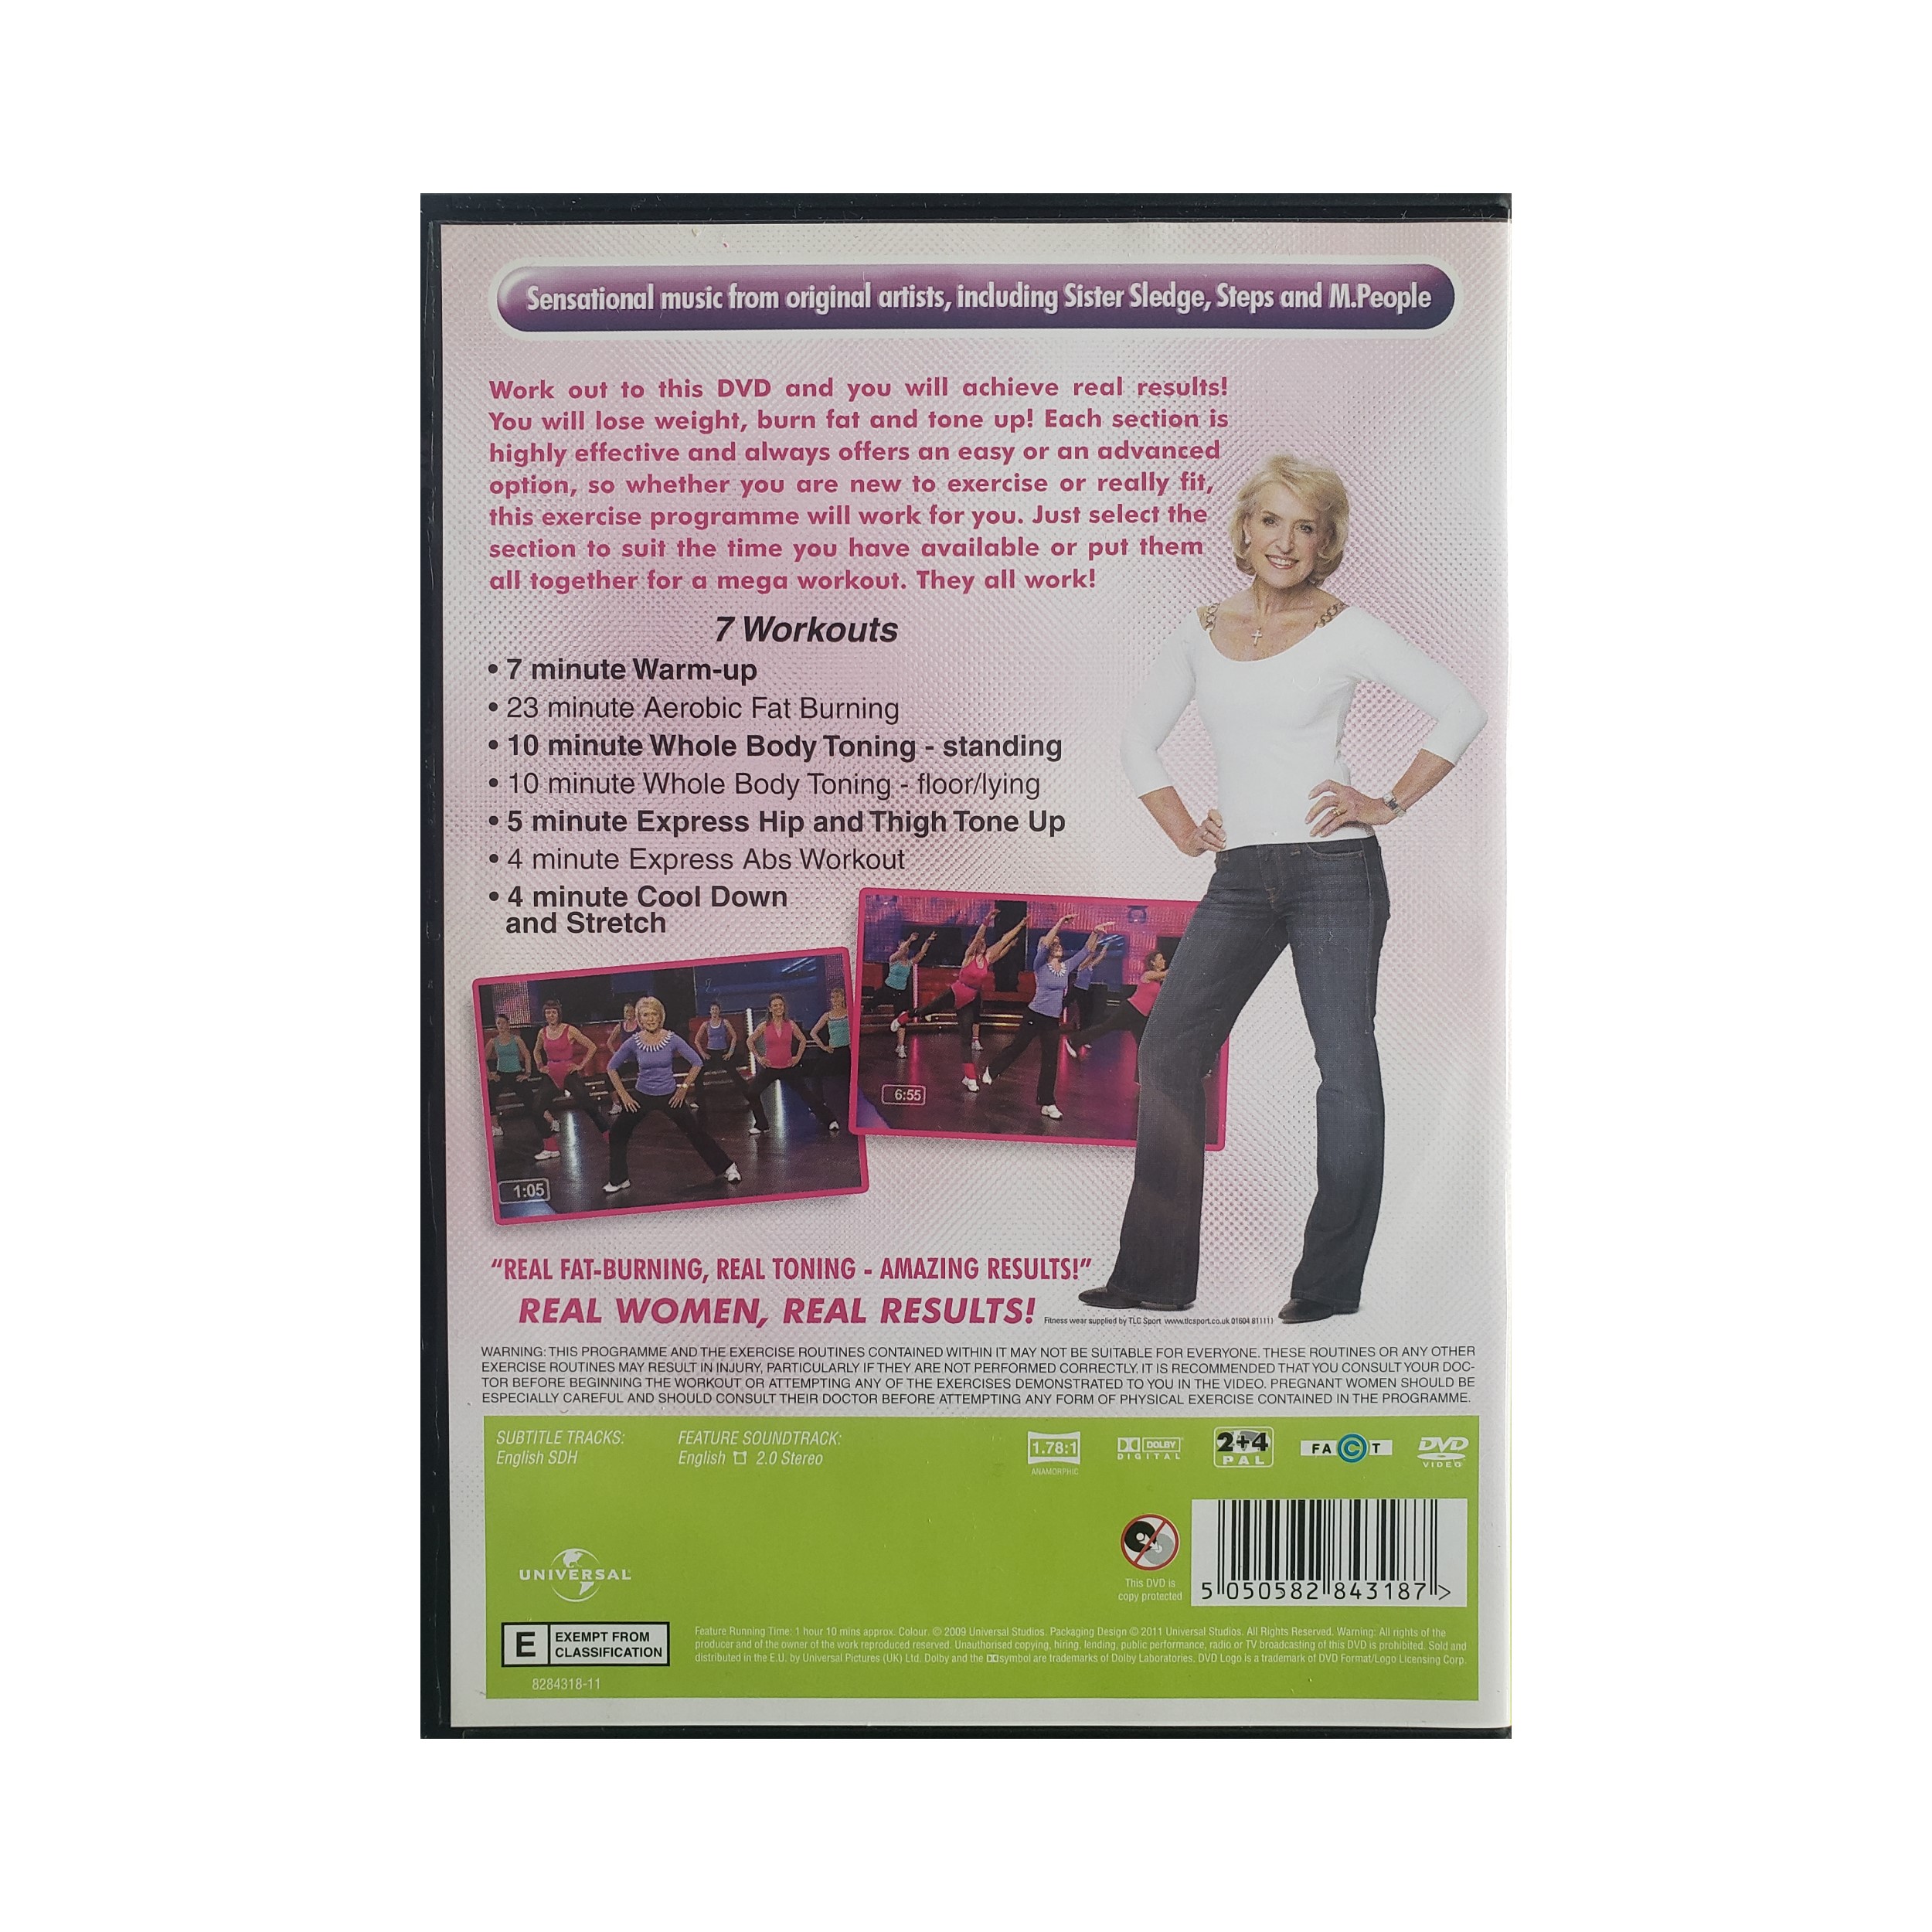 Image of the back cover of Rosemary Conley's Real Results Workout DVD Fitclub Edition